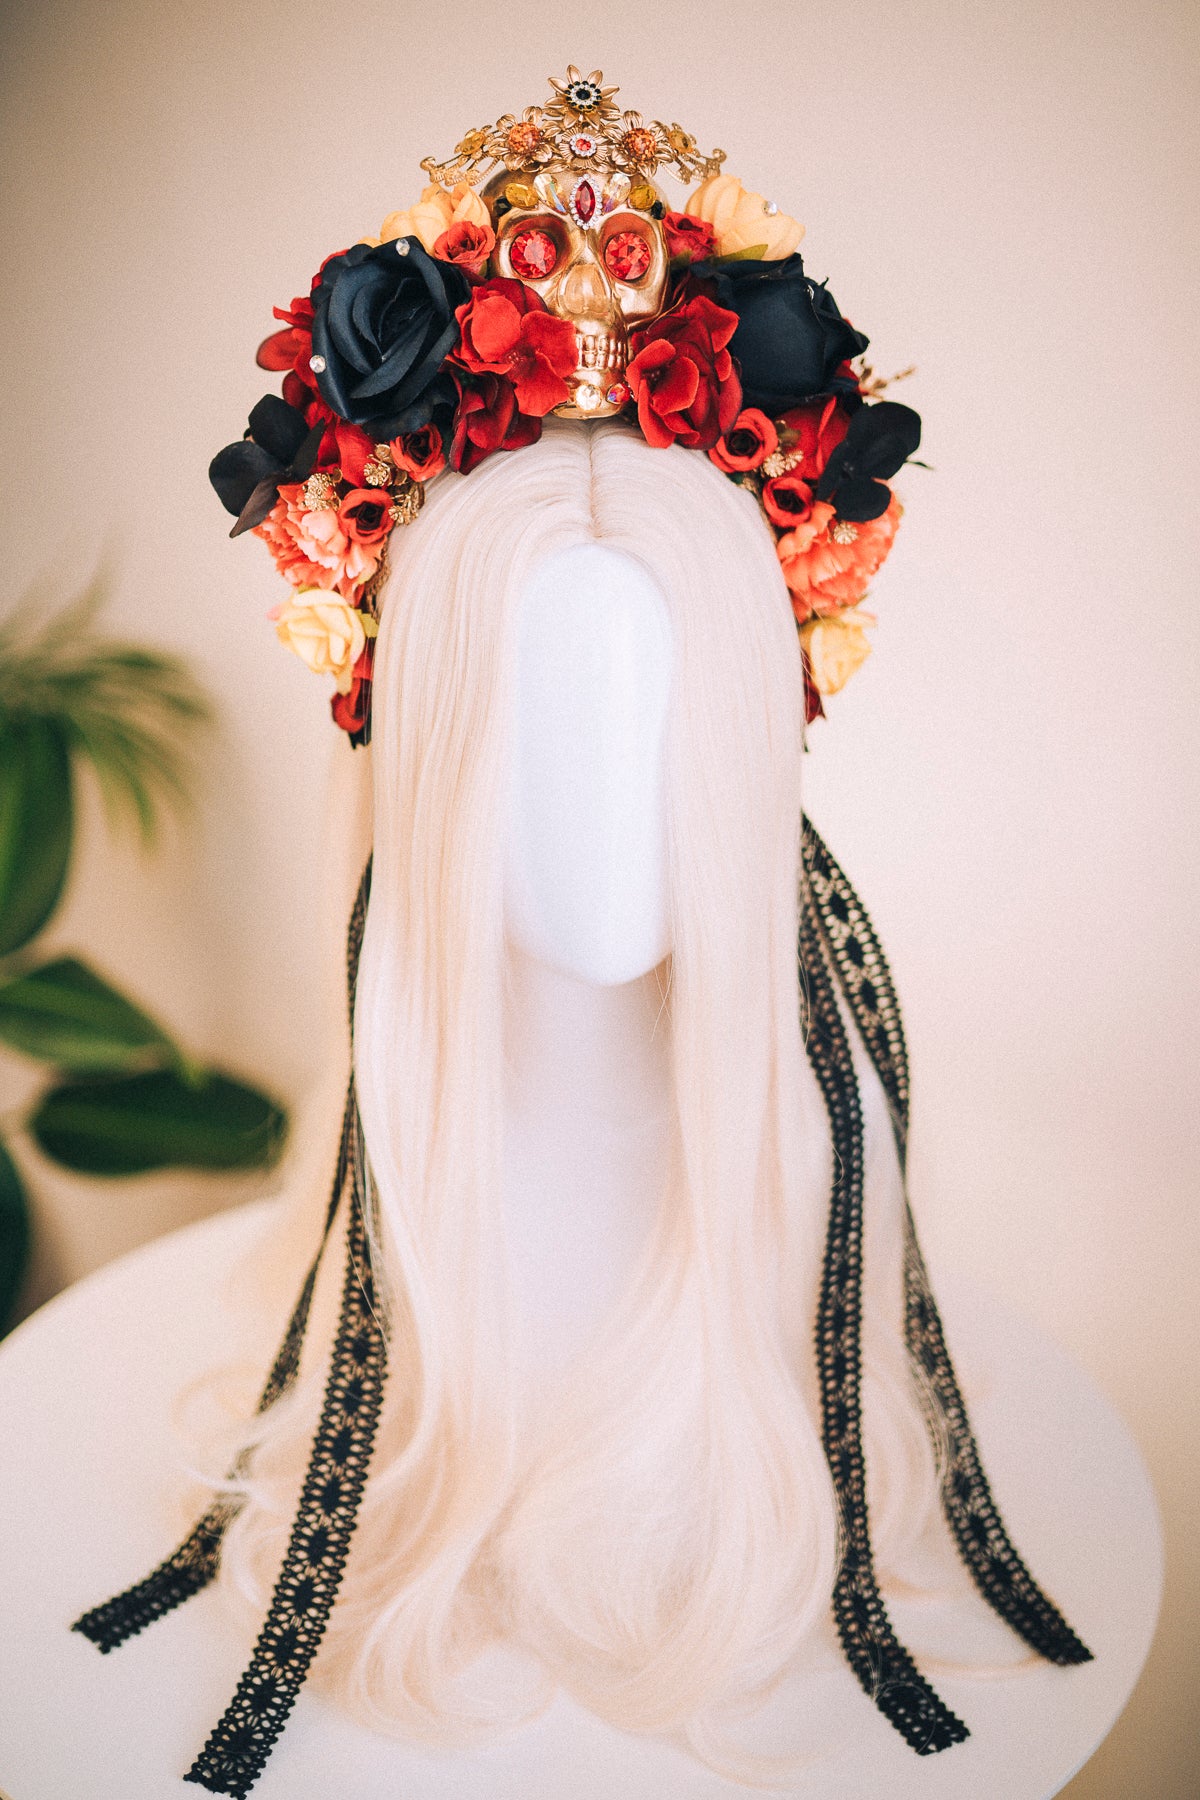 Load image into Gallery viewer, Flower Halo Crown Sugar Skull
